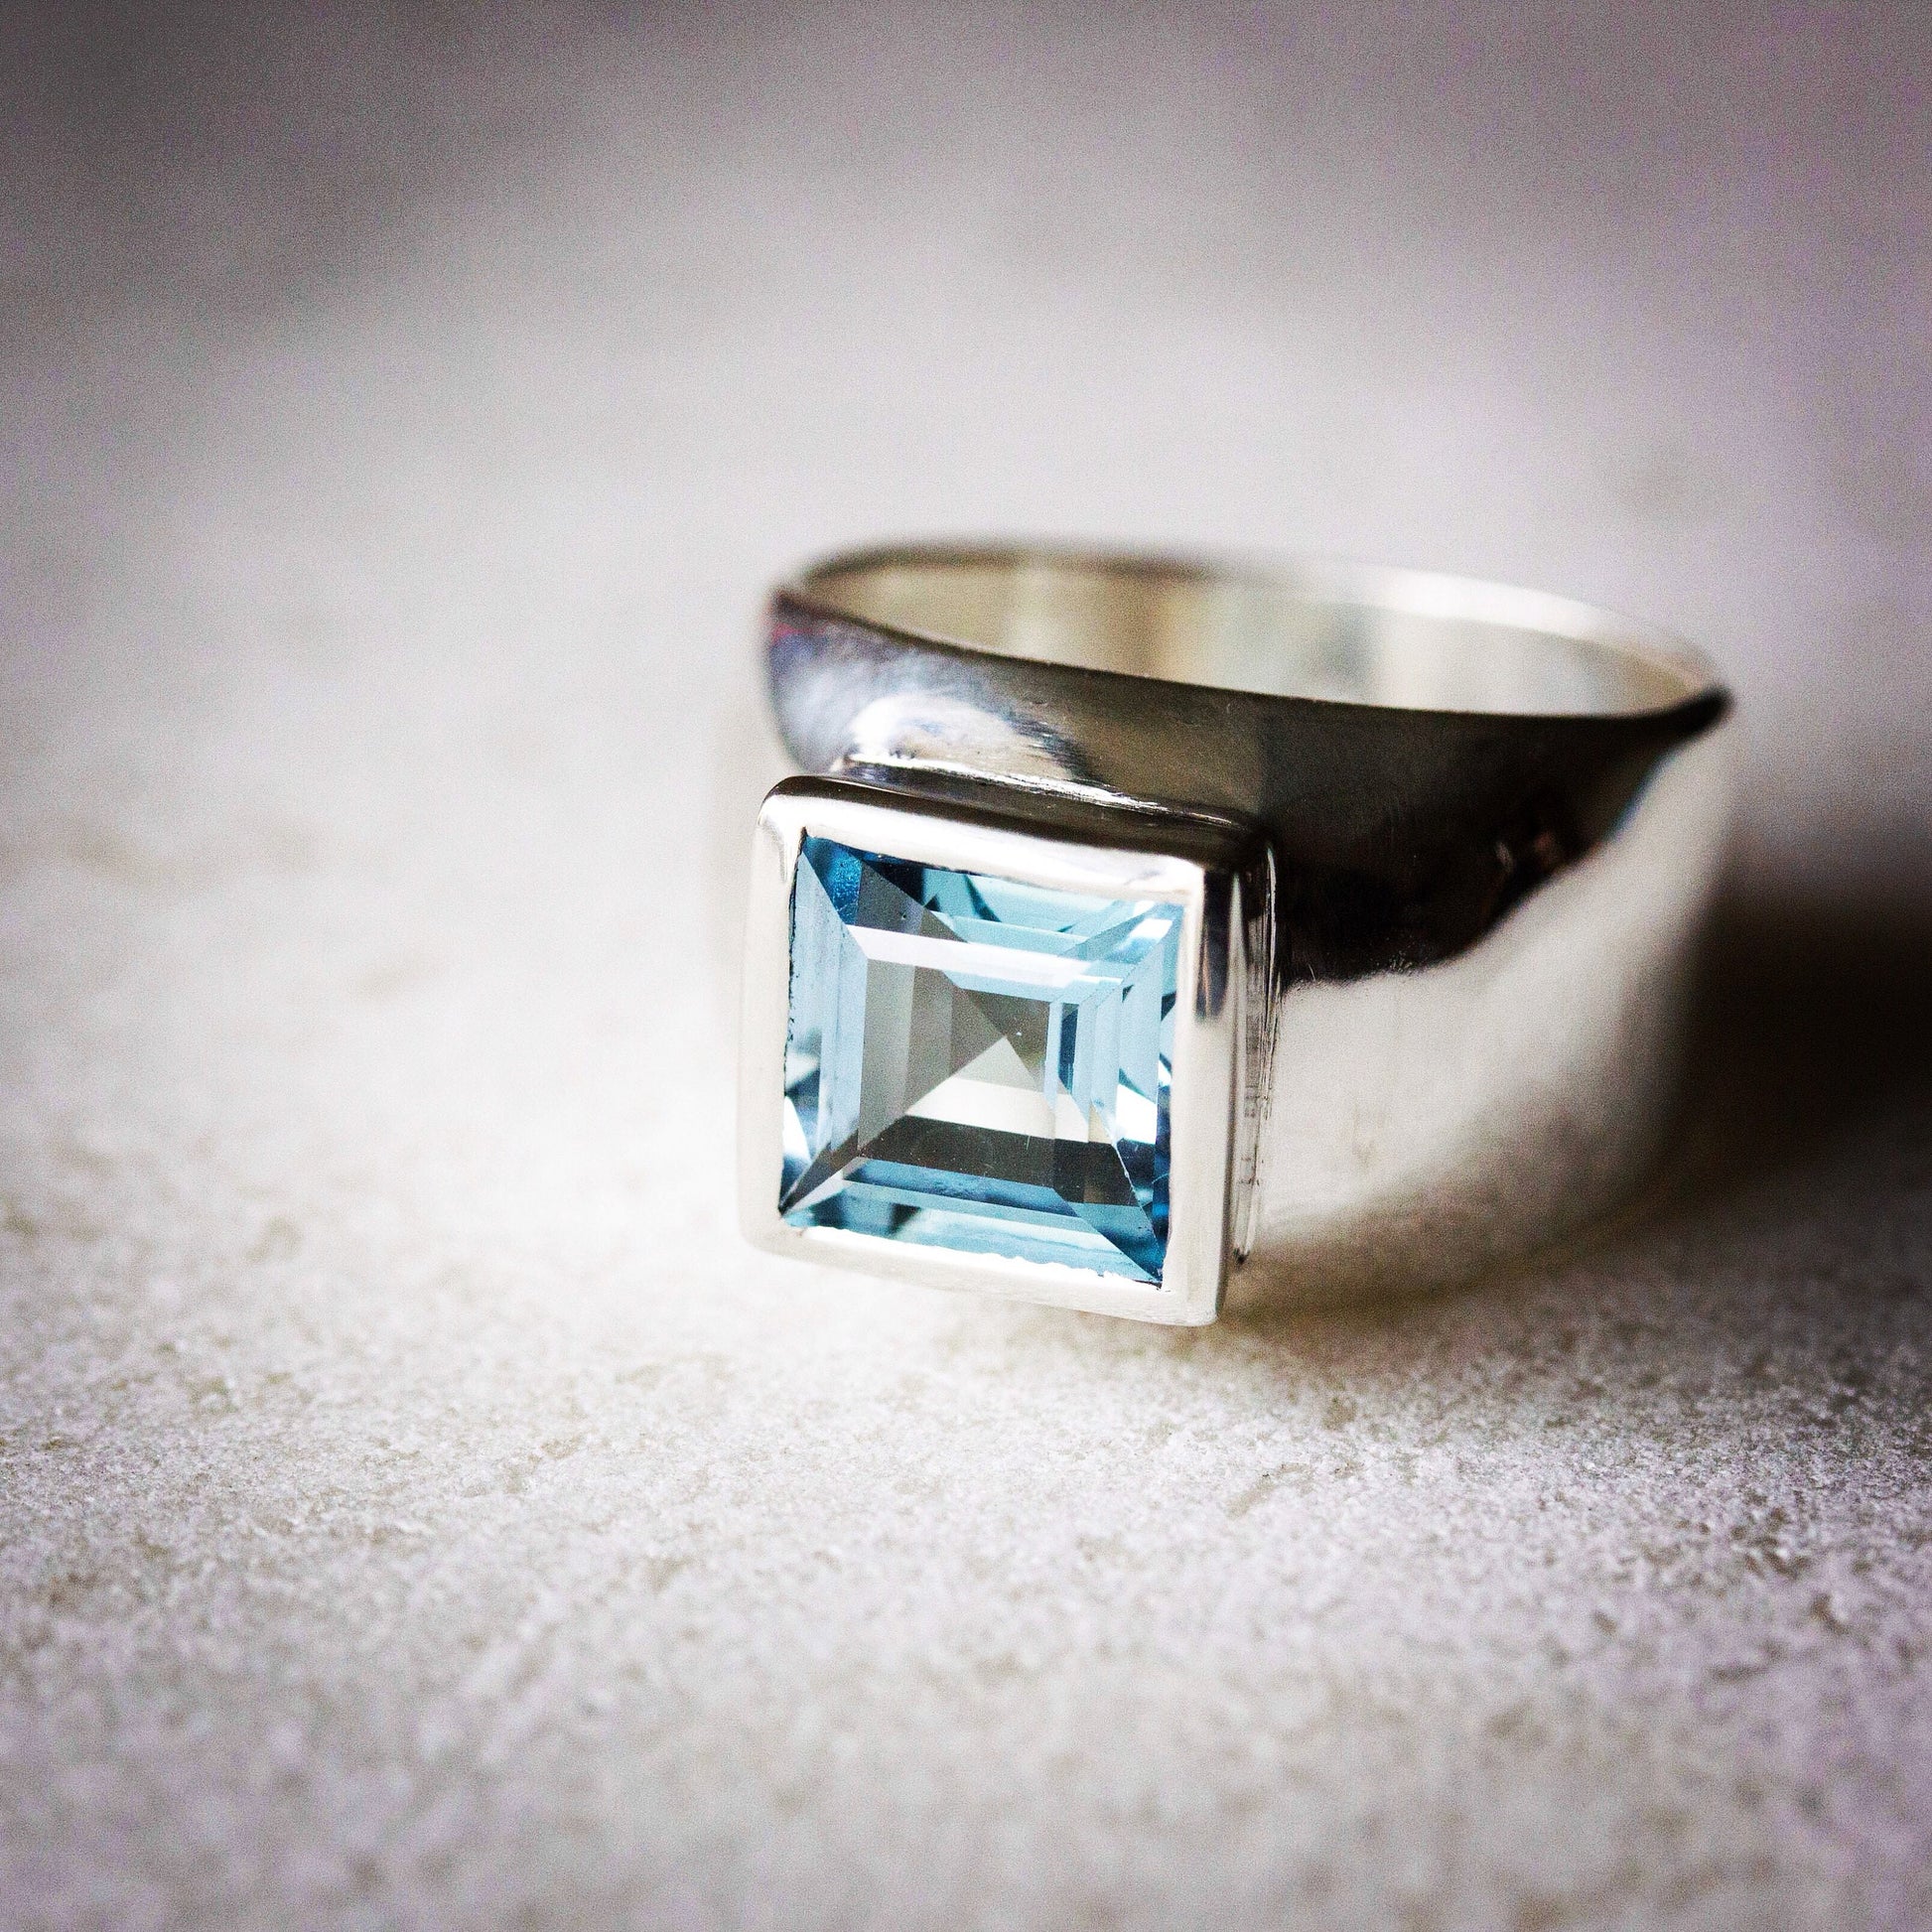 A handmade Sterling Silver Princess Cut Ring with a blue topaz stone.